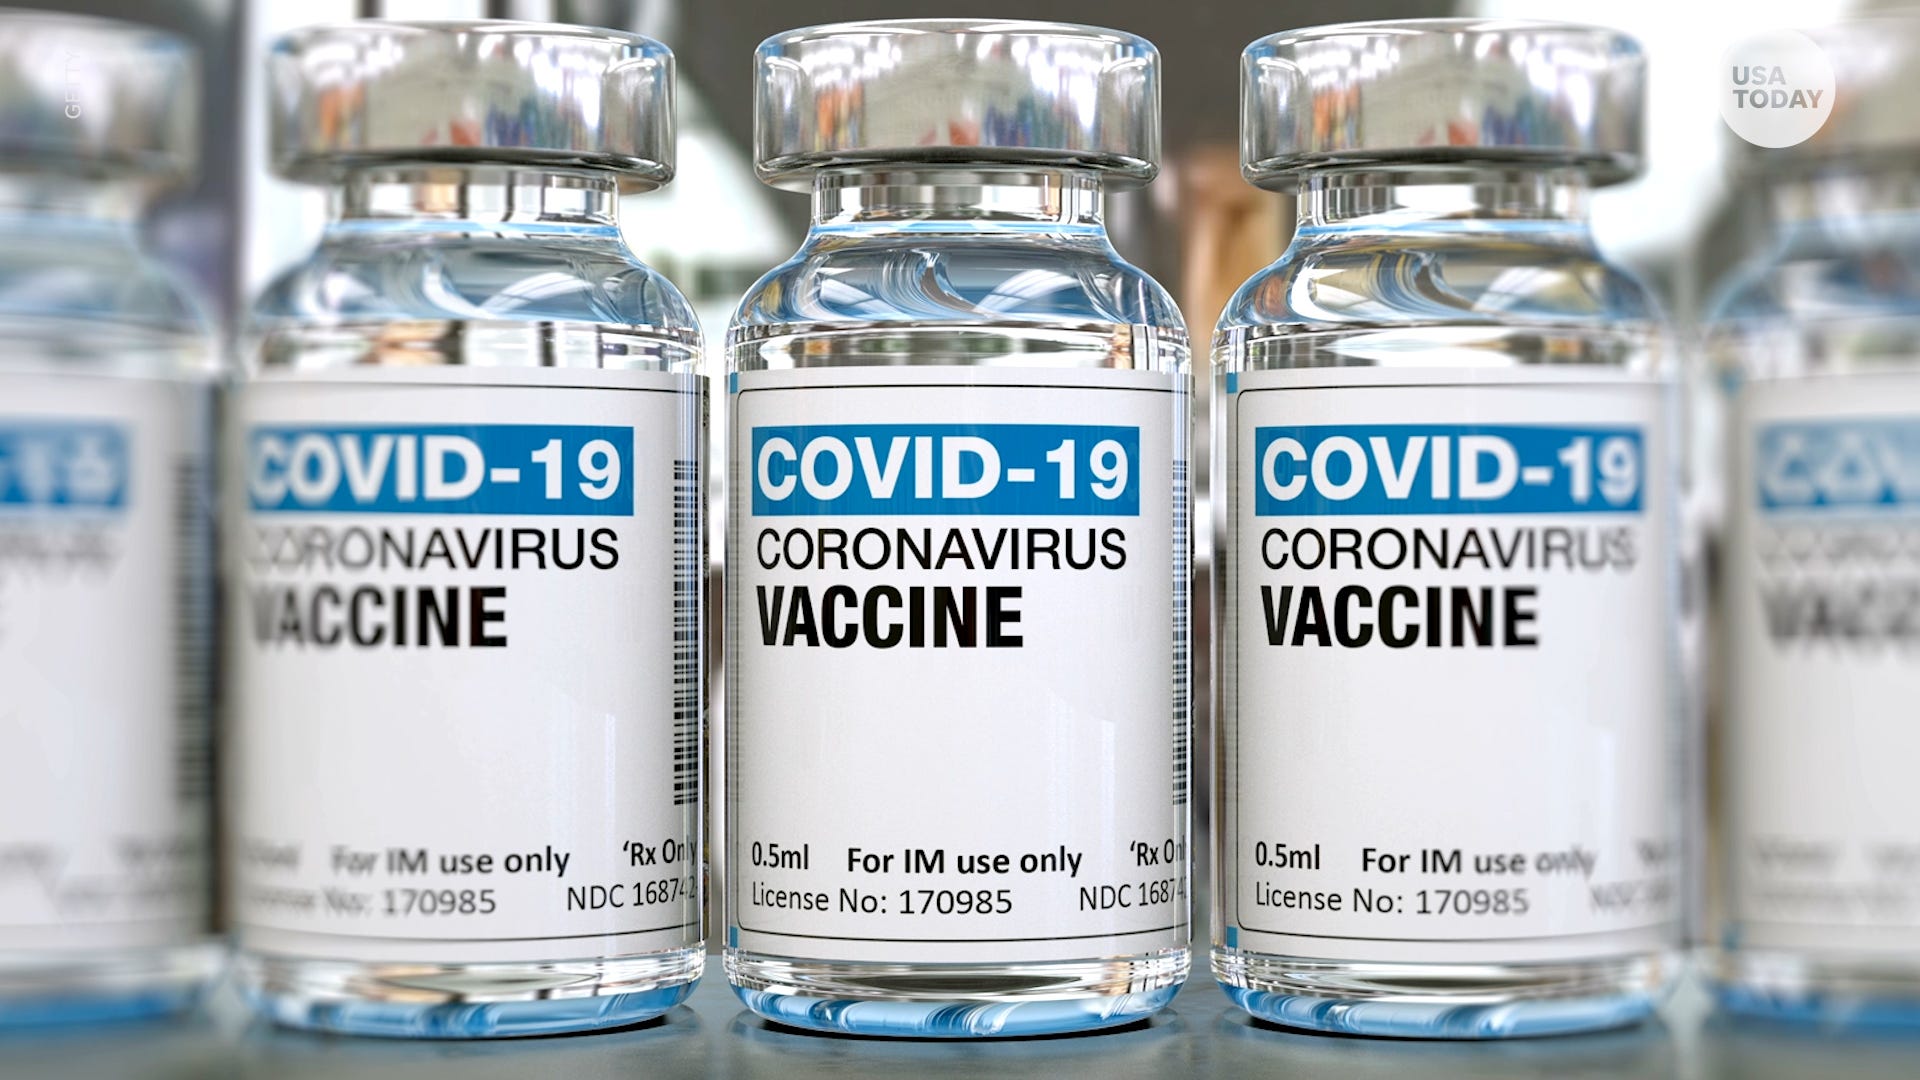 COVID-19: All Indians to get free vaccine; shots to 30 cr people by July